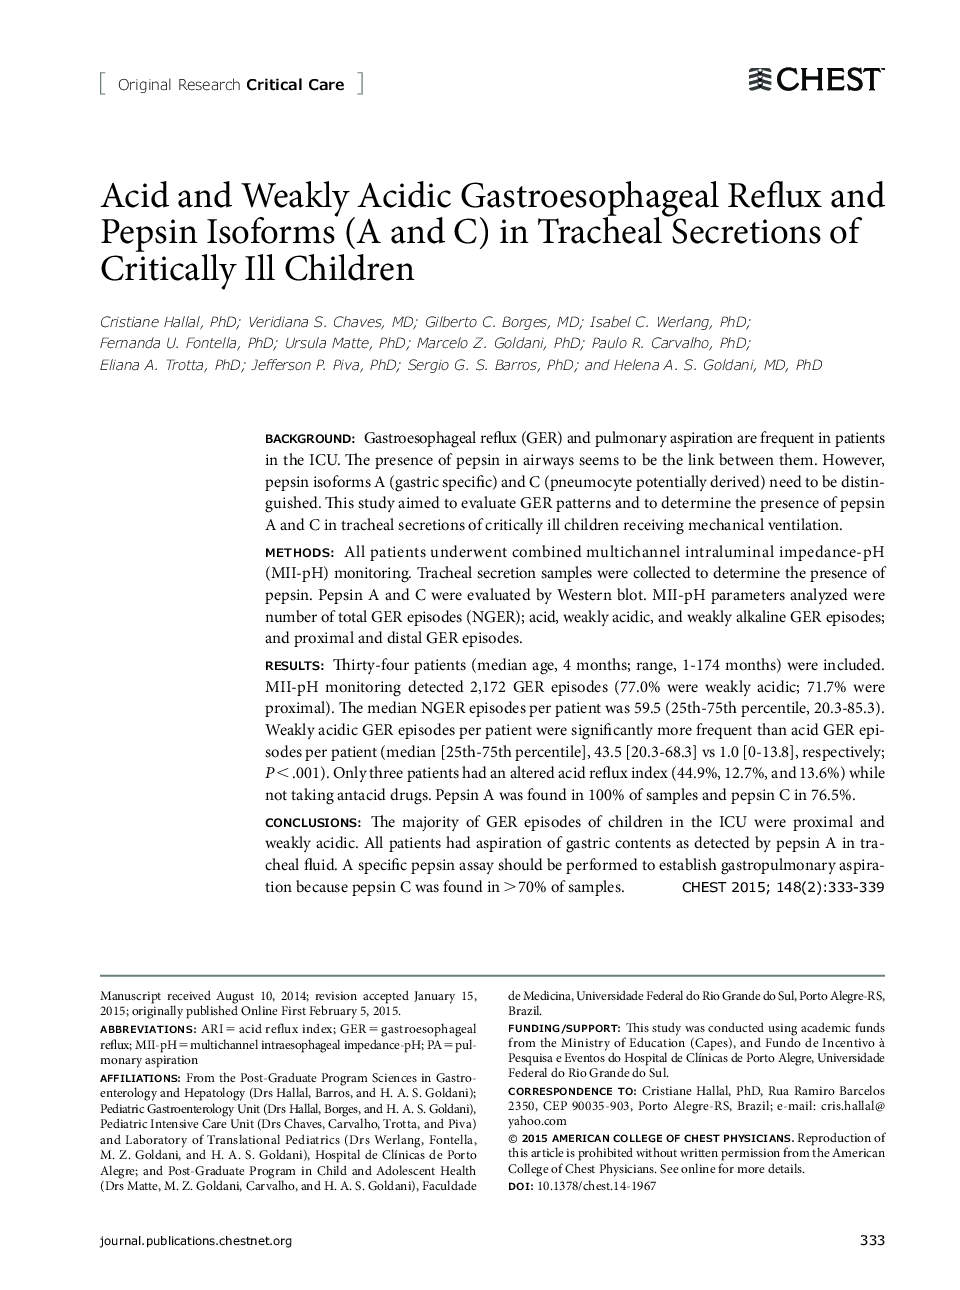 Acid and Weakly Acidic Gastroesophageal Reflux and Pepsin Isoforms (A and C) in Tracheal Secretions of Critically Ill Children